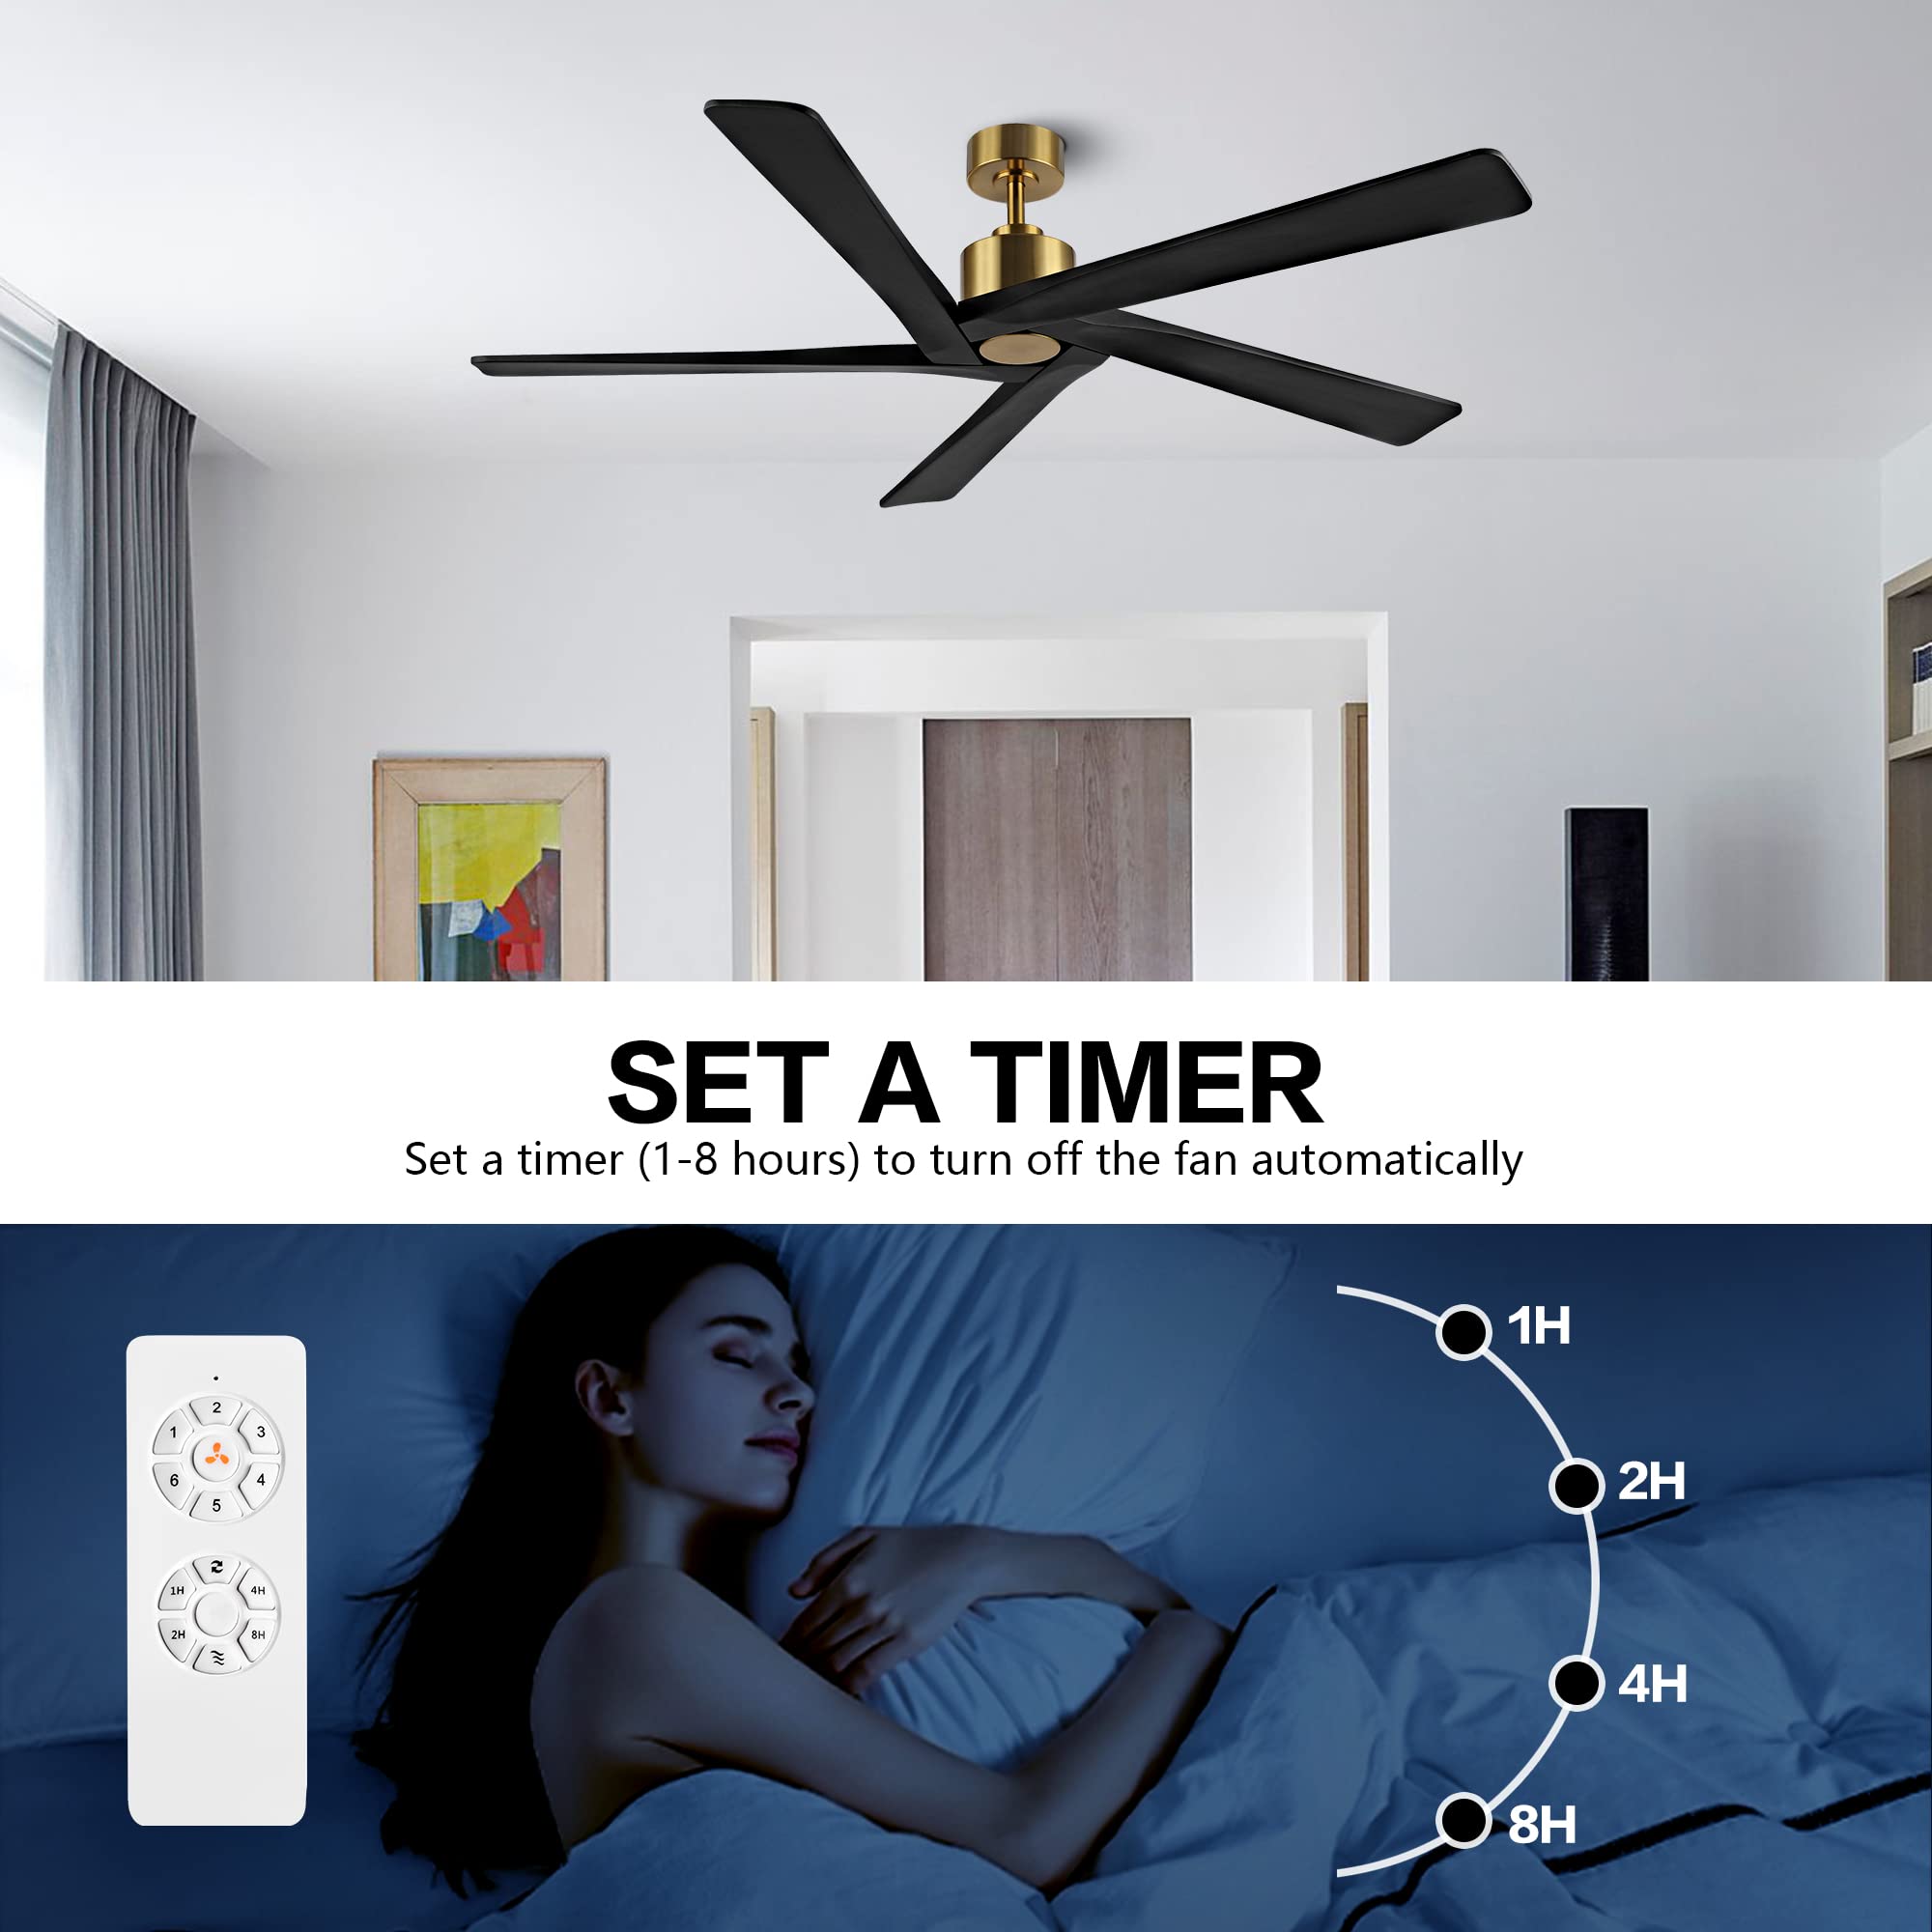 WINGBO 64 Inch DC Ceiling Fan without Lights, 5 Reversible Carved Solid Wood Blades, 6-Speed Noiseless DC Motor, Ceiling Fan No Light with Remote, Brass Finish with Black Blades, ETL Listed